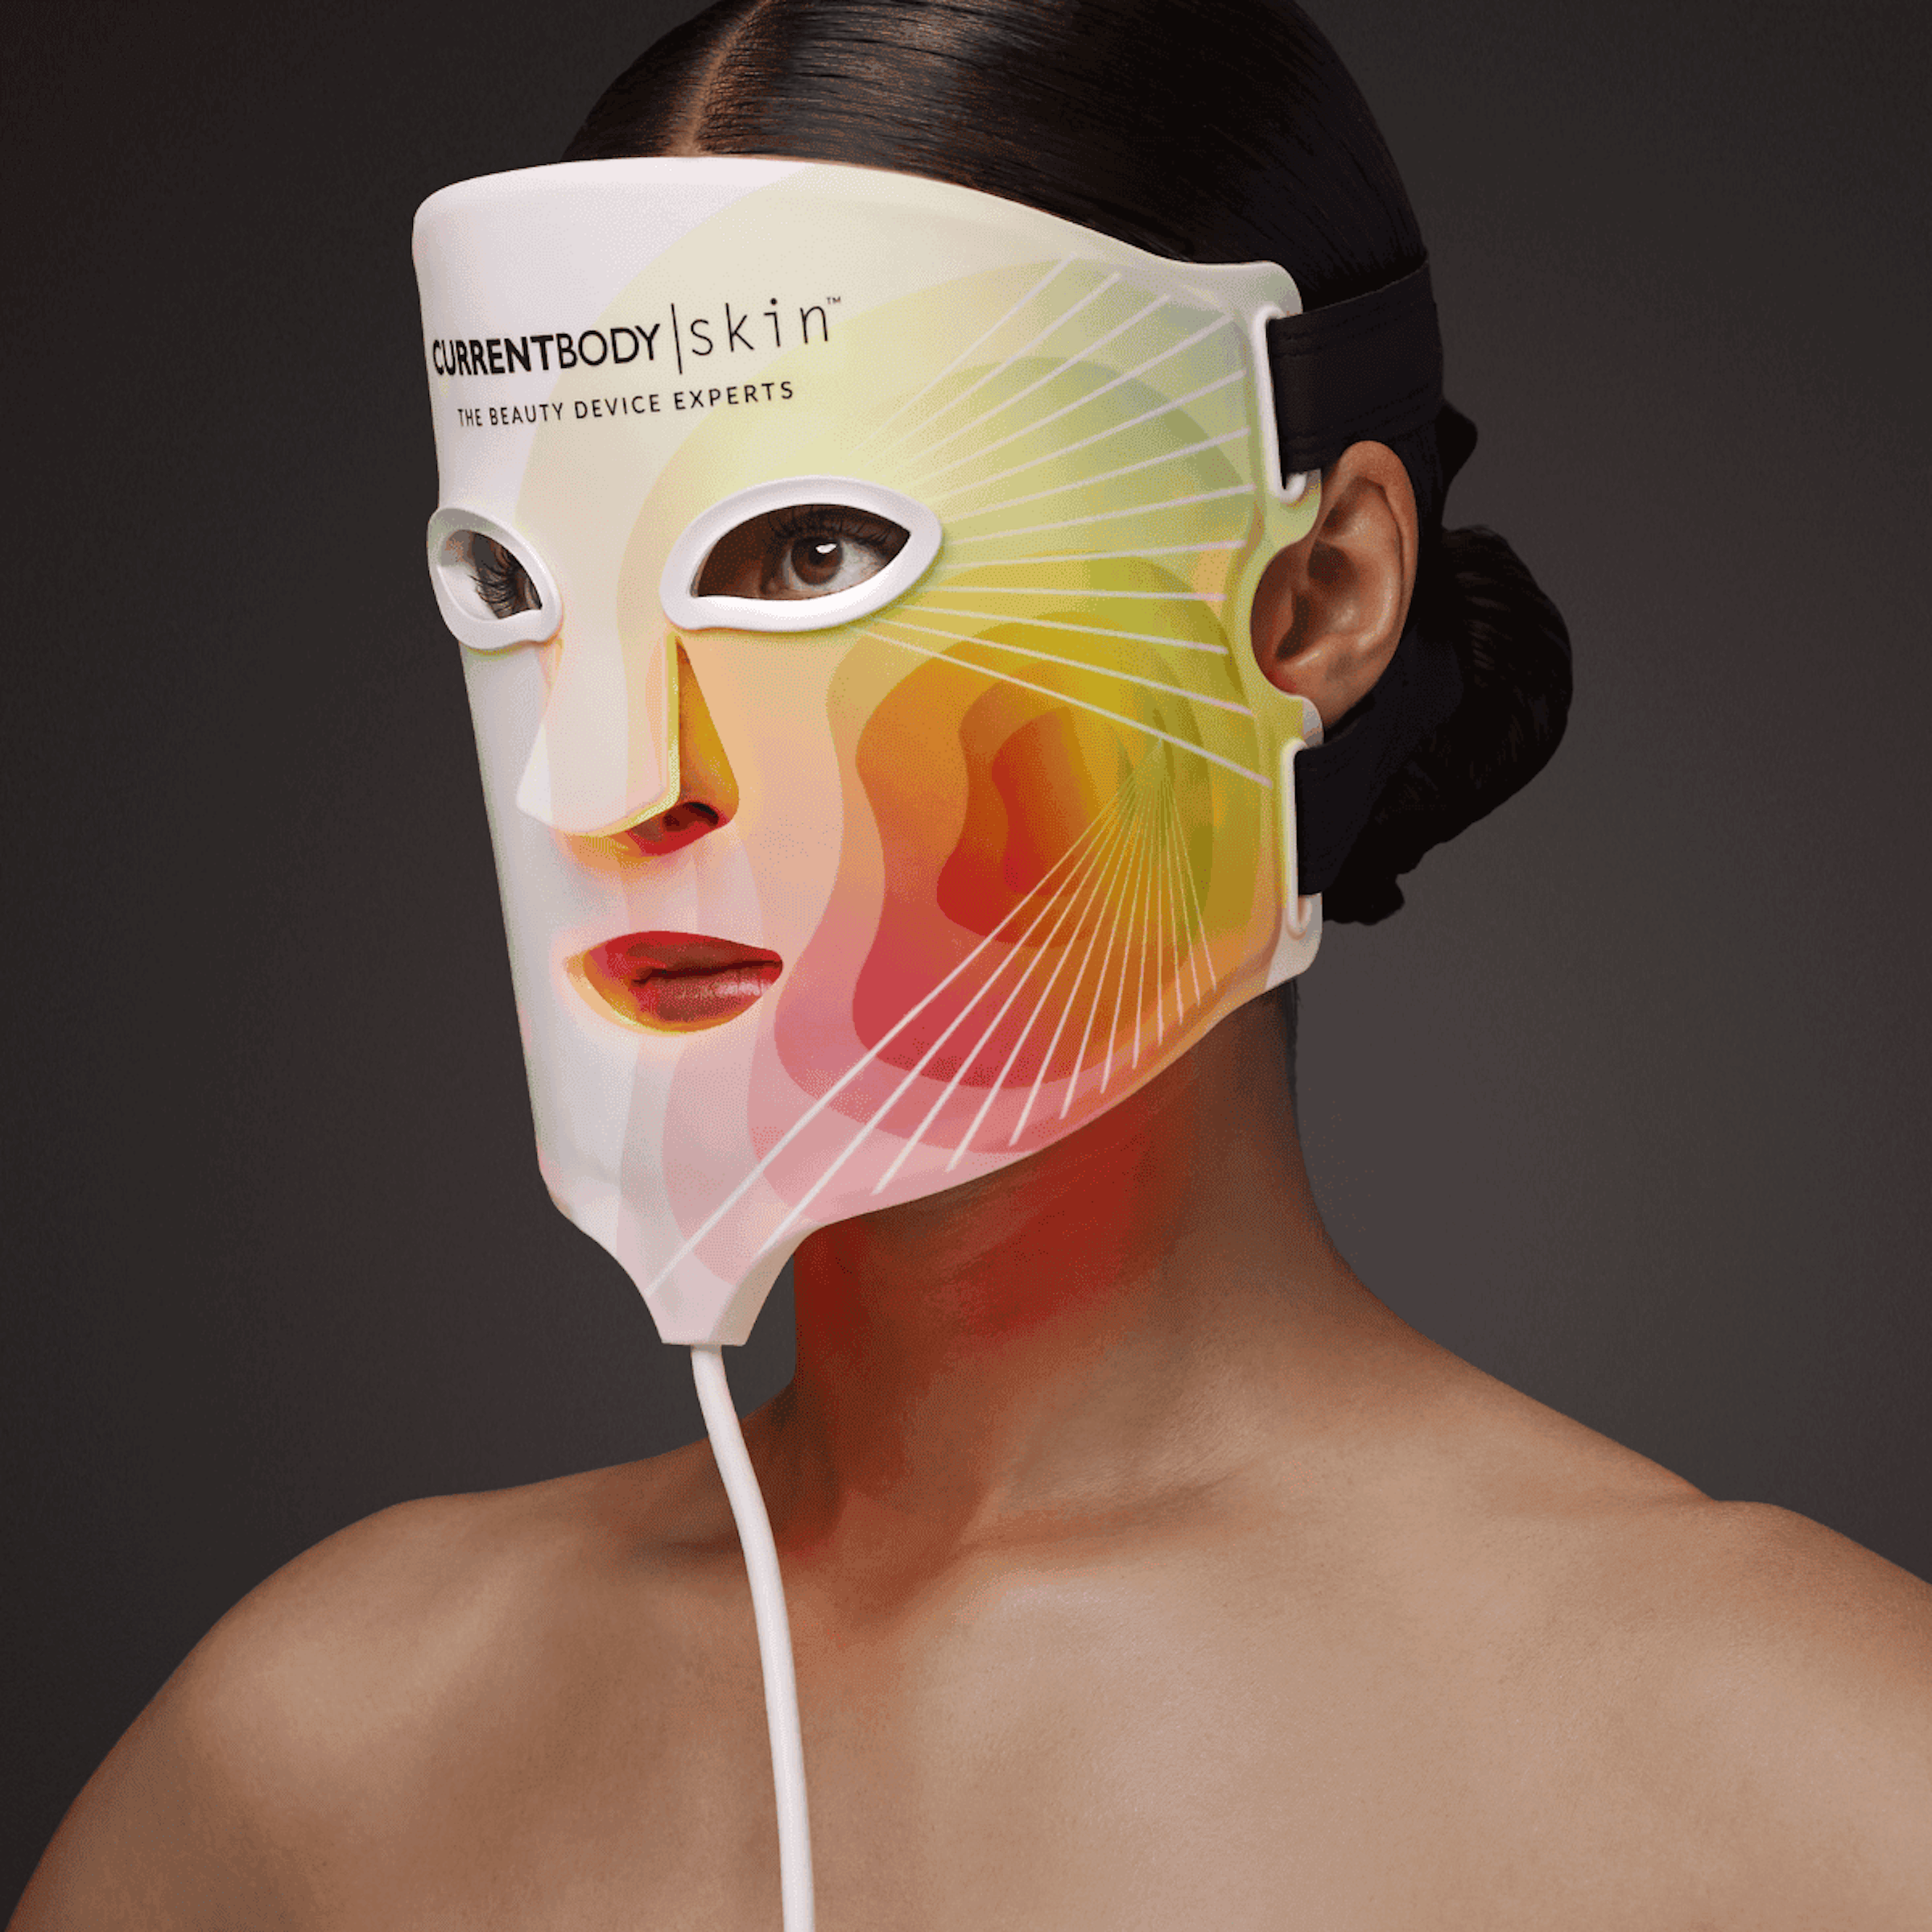 The 'LED 4-in-1 Zone Facial Mapping Mask' incorporates 360 LED lights to address the skin concerns of Asian customers.